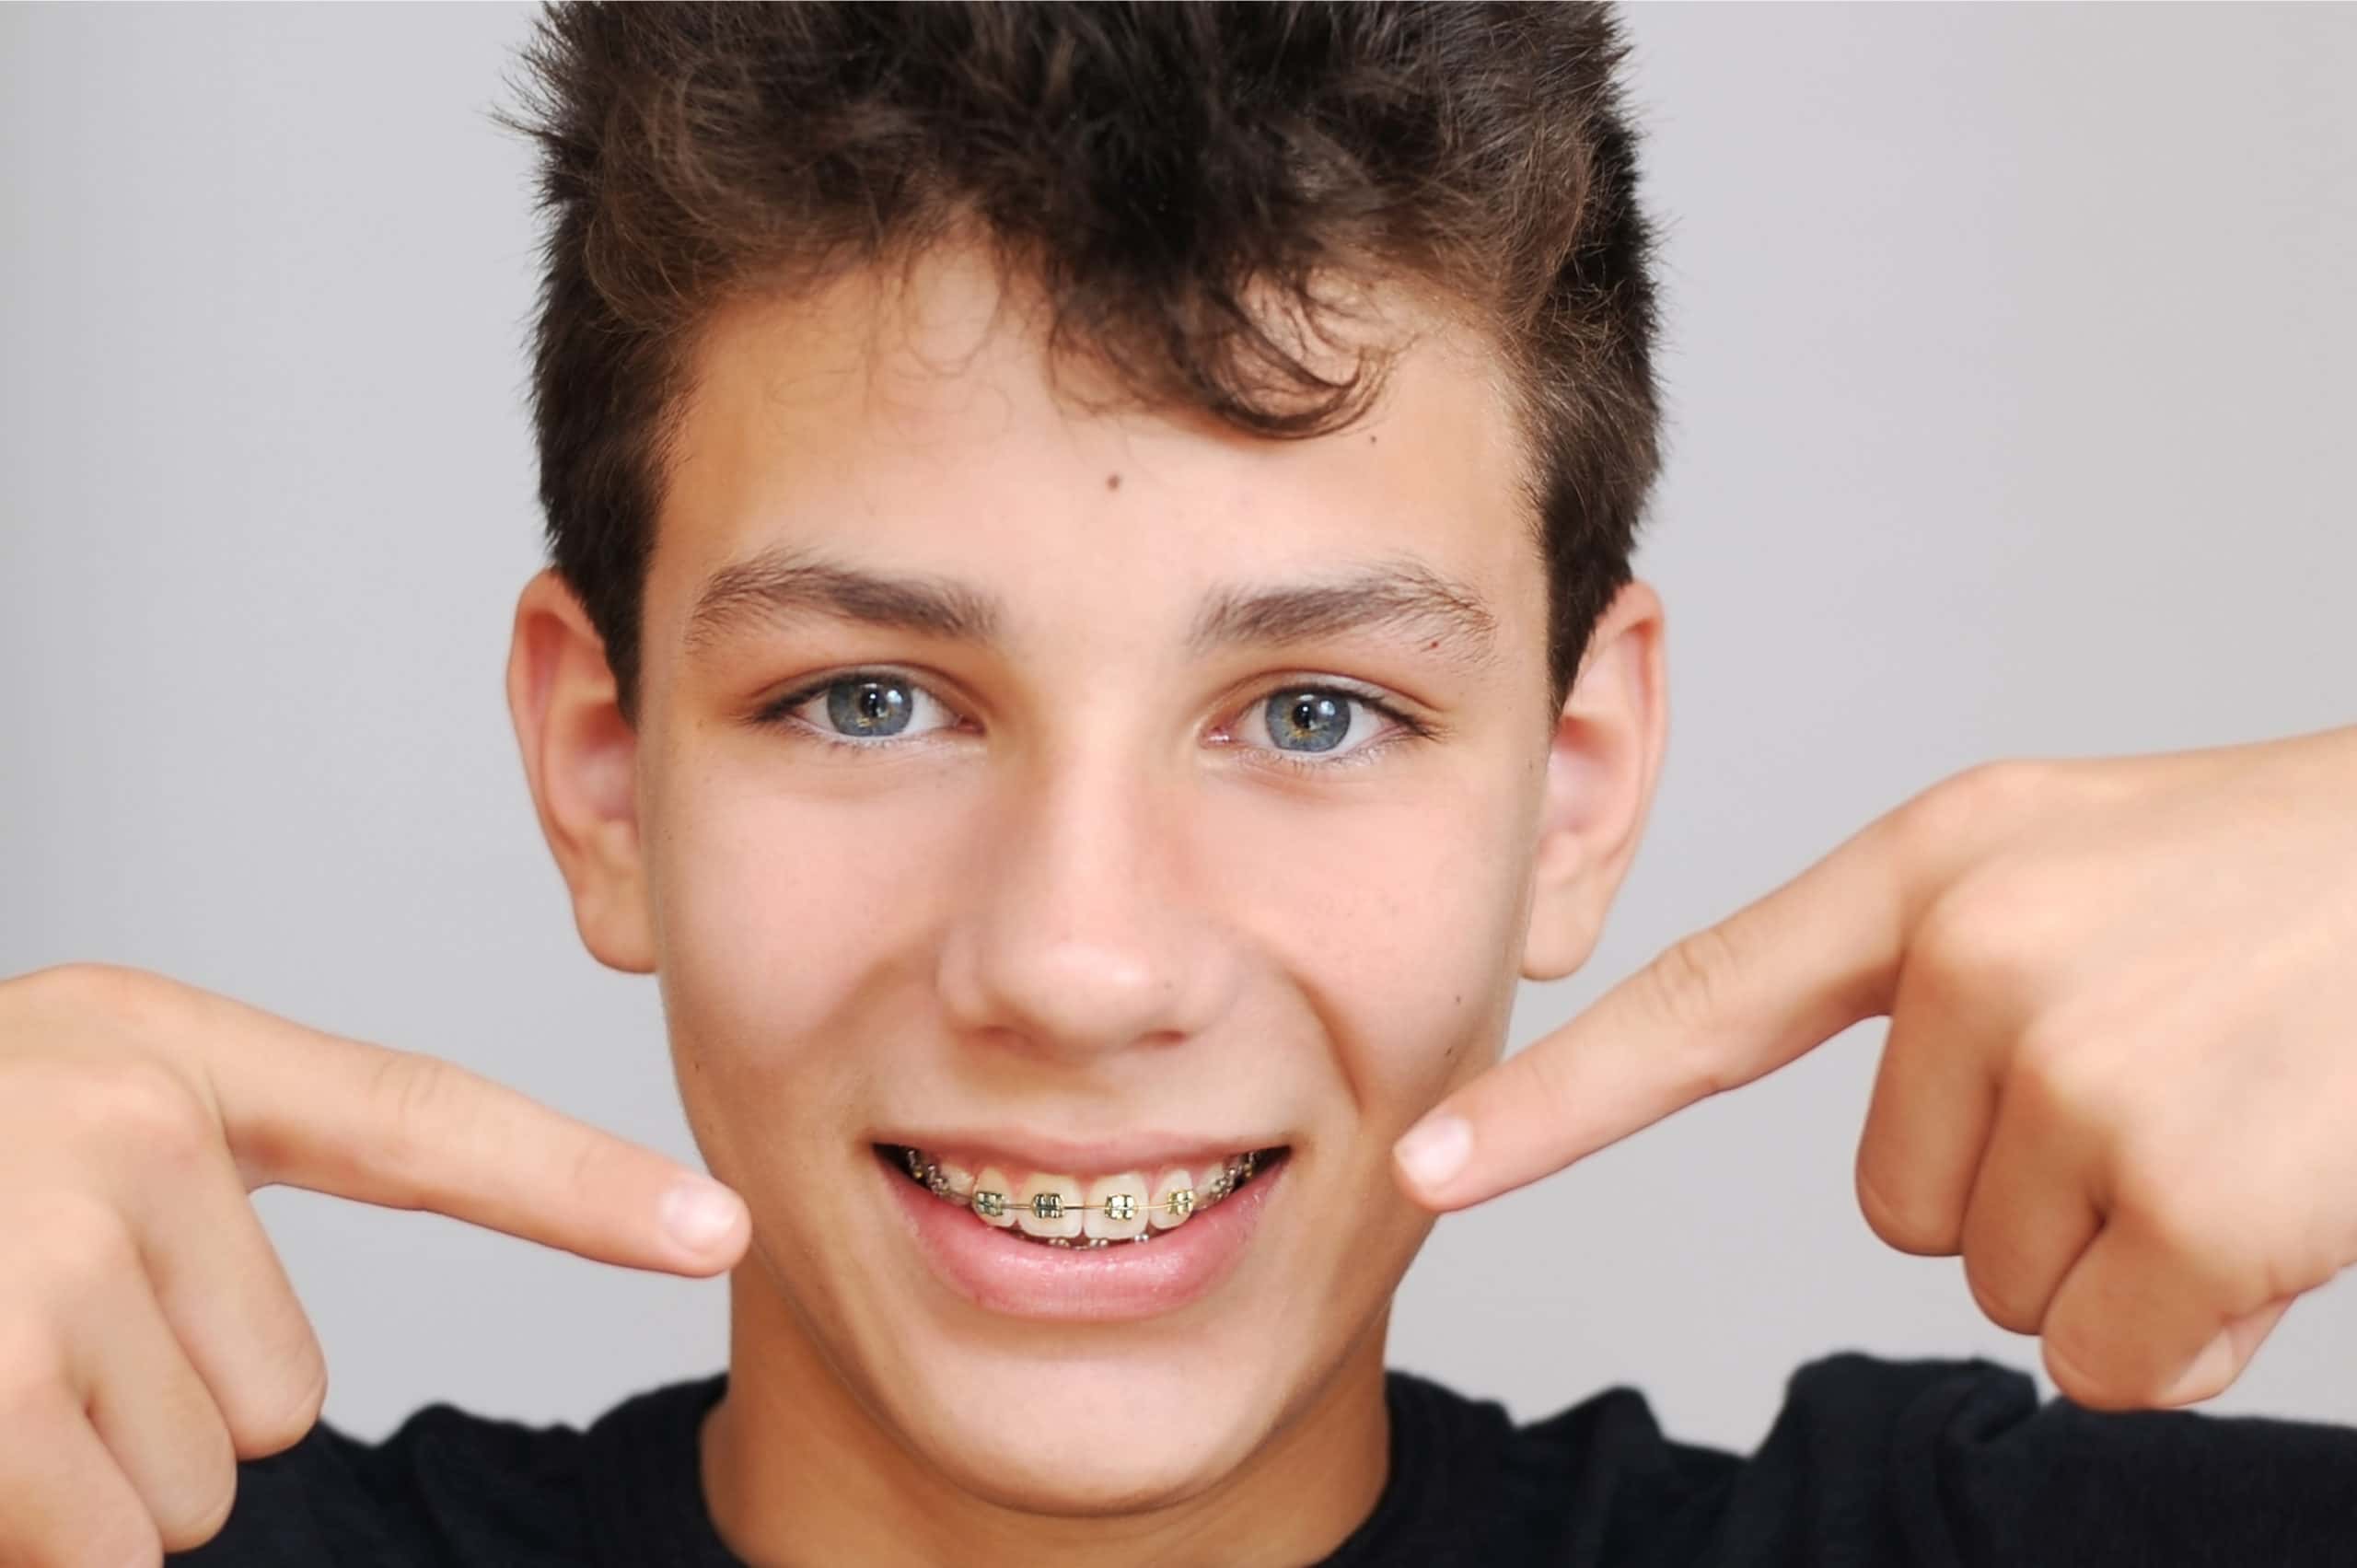 Young boy with smile pointing his teeth having braces with both hands